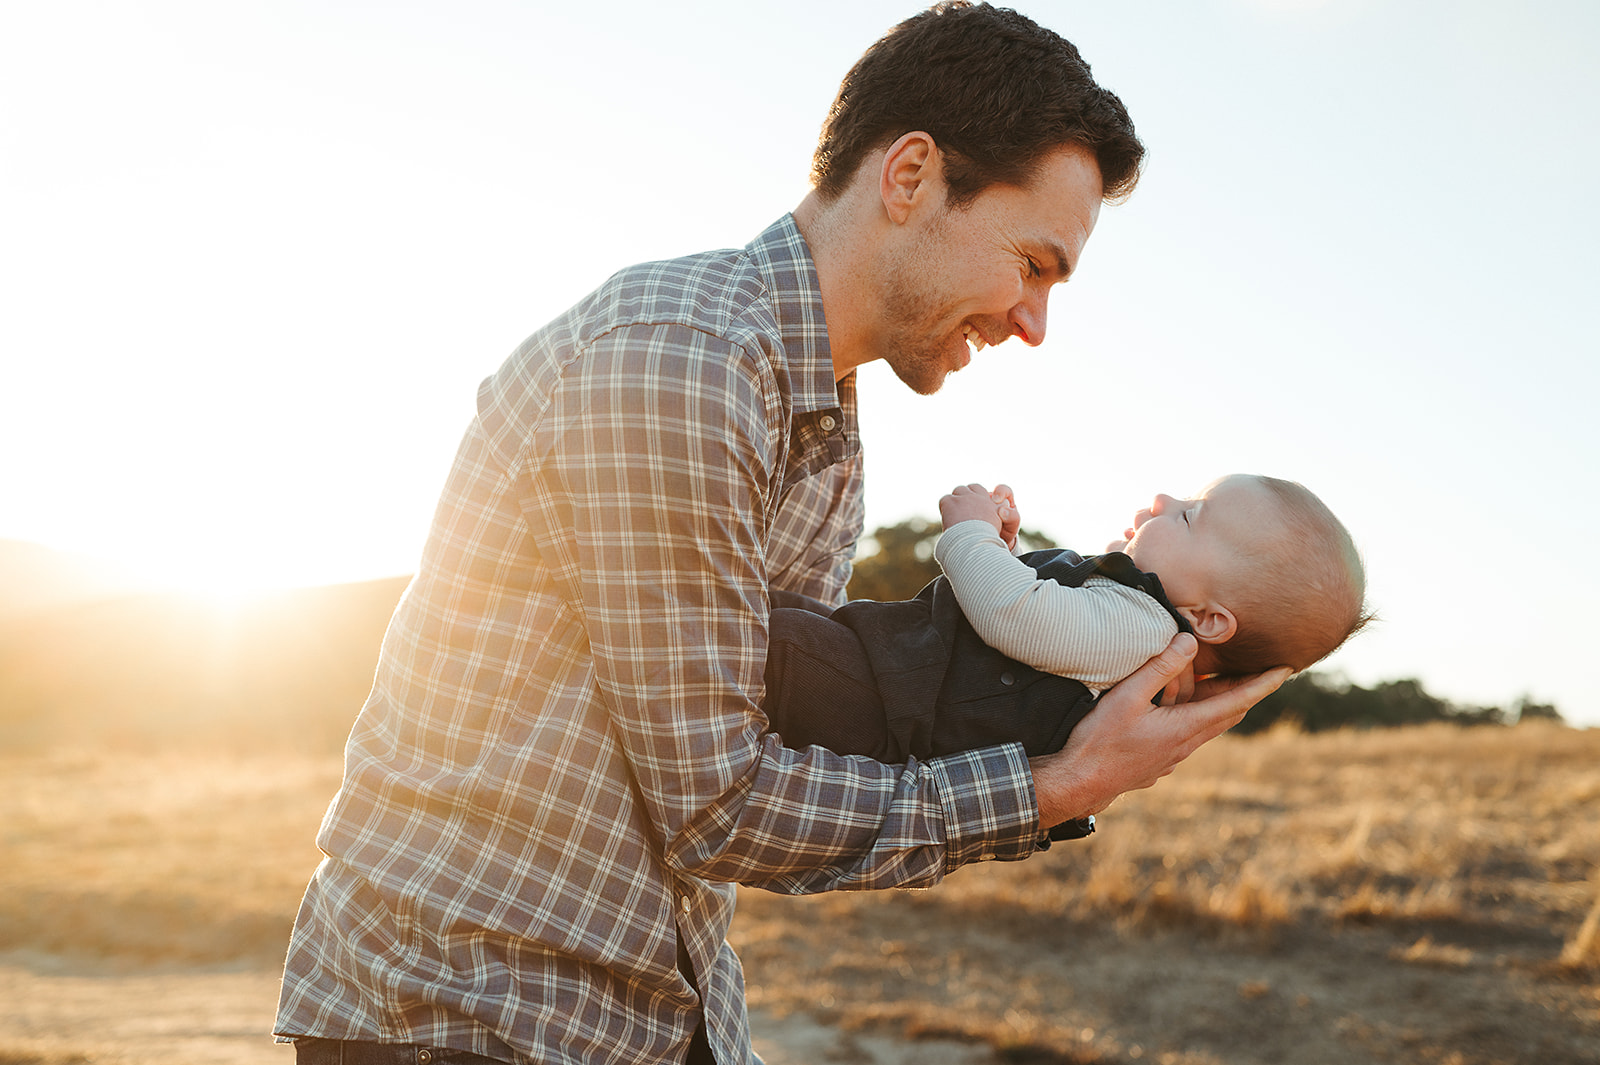 Dad smiling down at baby during photo session at Helen Putnam Park in Petaluma, California by Sunshine Lady Photography